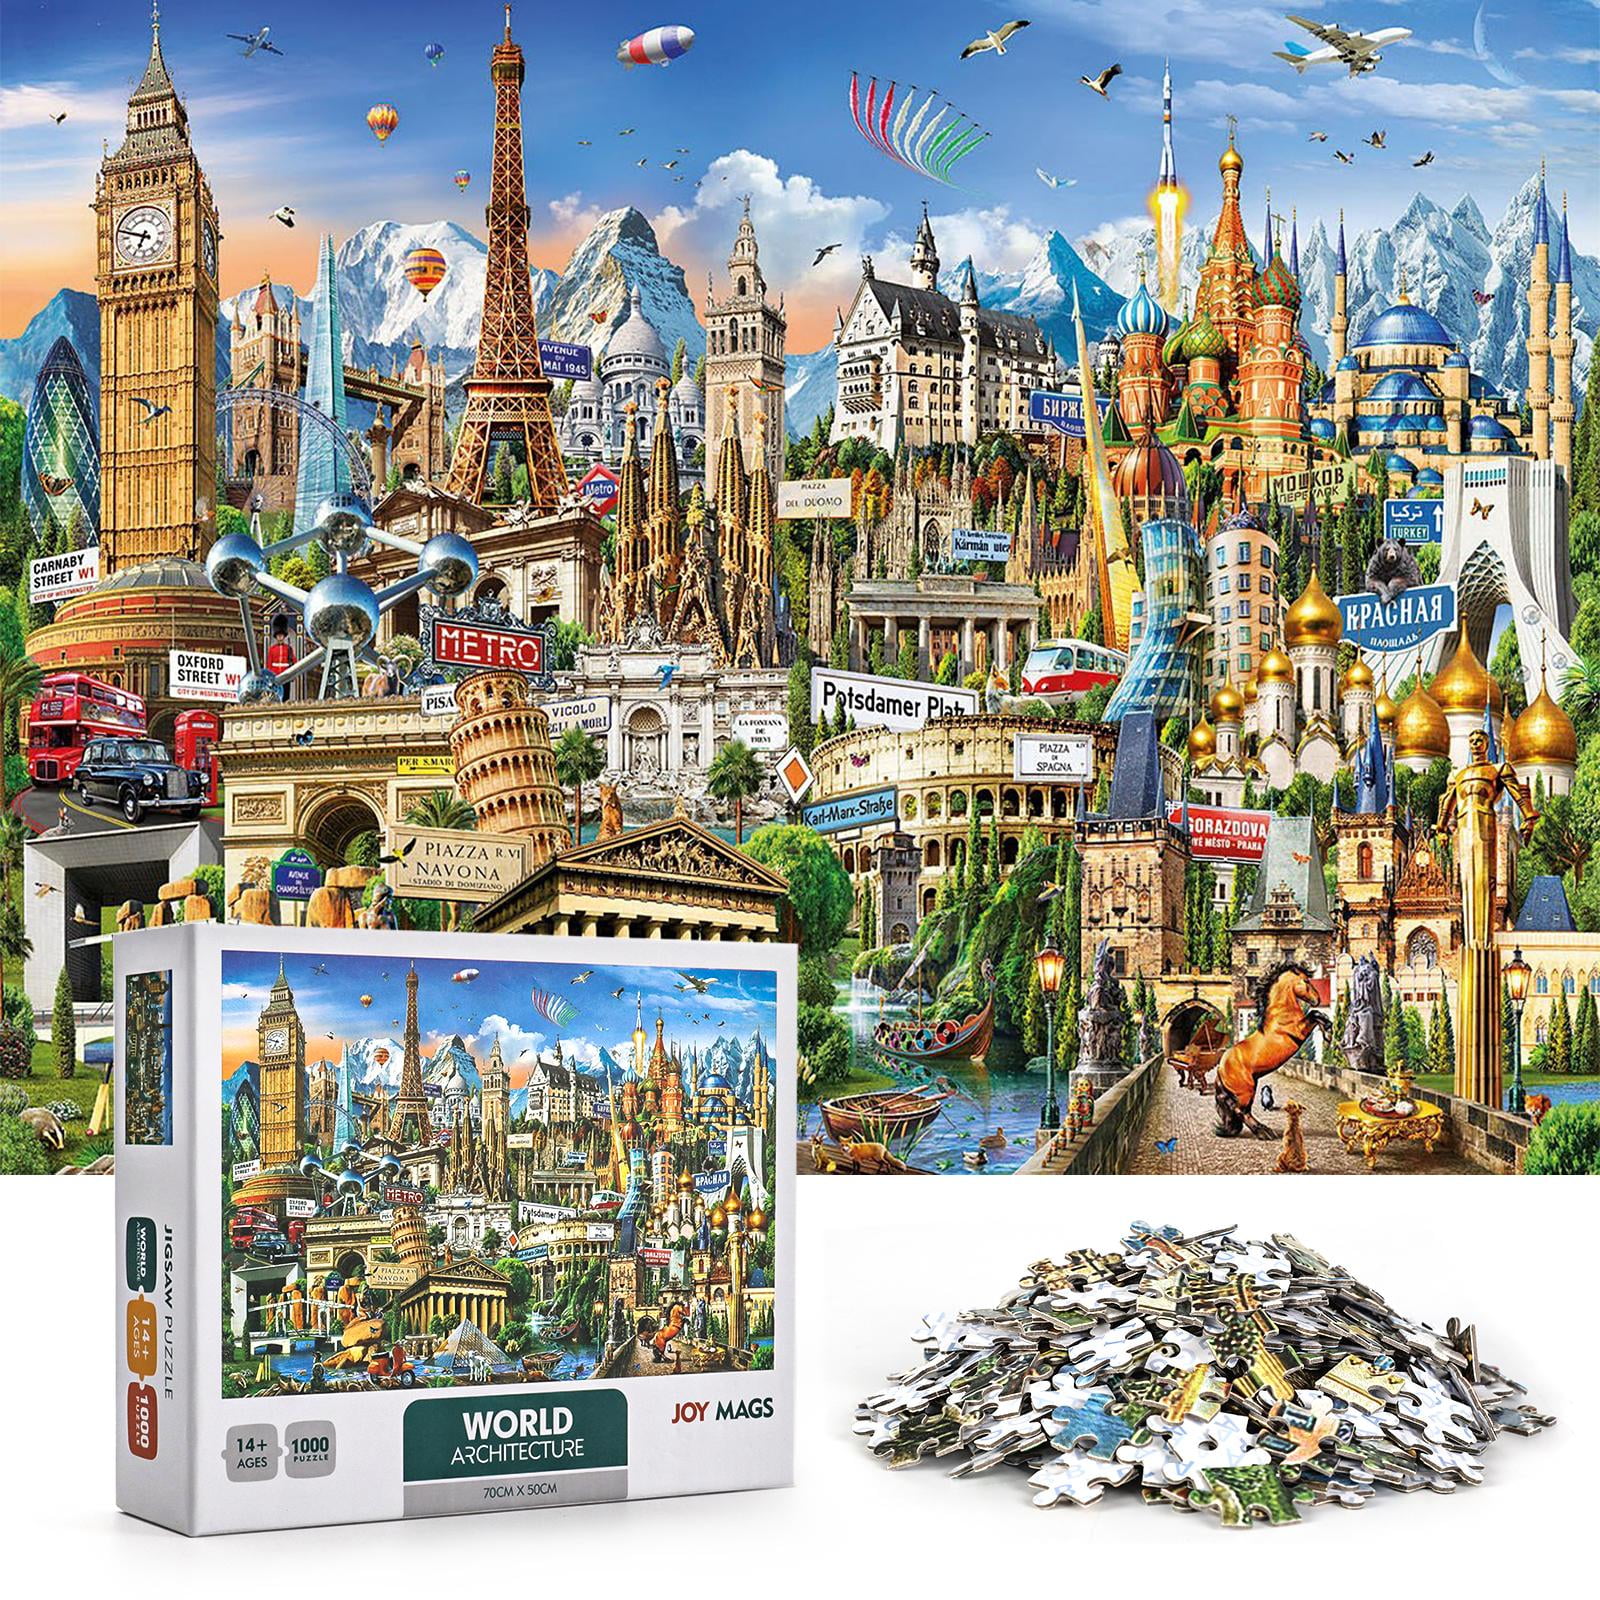 Jigsaw Puzzles 2000 Pieces for Adults and Kids constellation-2000 High Resolution 2000 Piece Jigsaw Puzzle Teens Jigsaw Puzzles Fun Large Puzzle Game